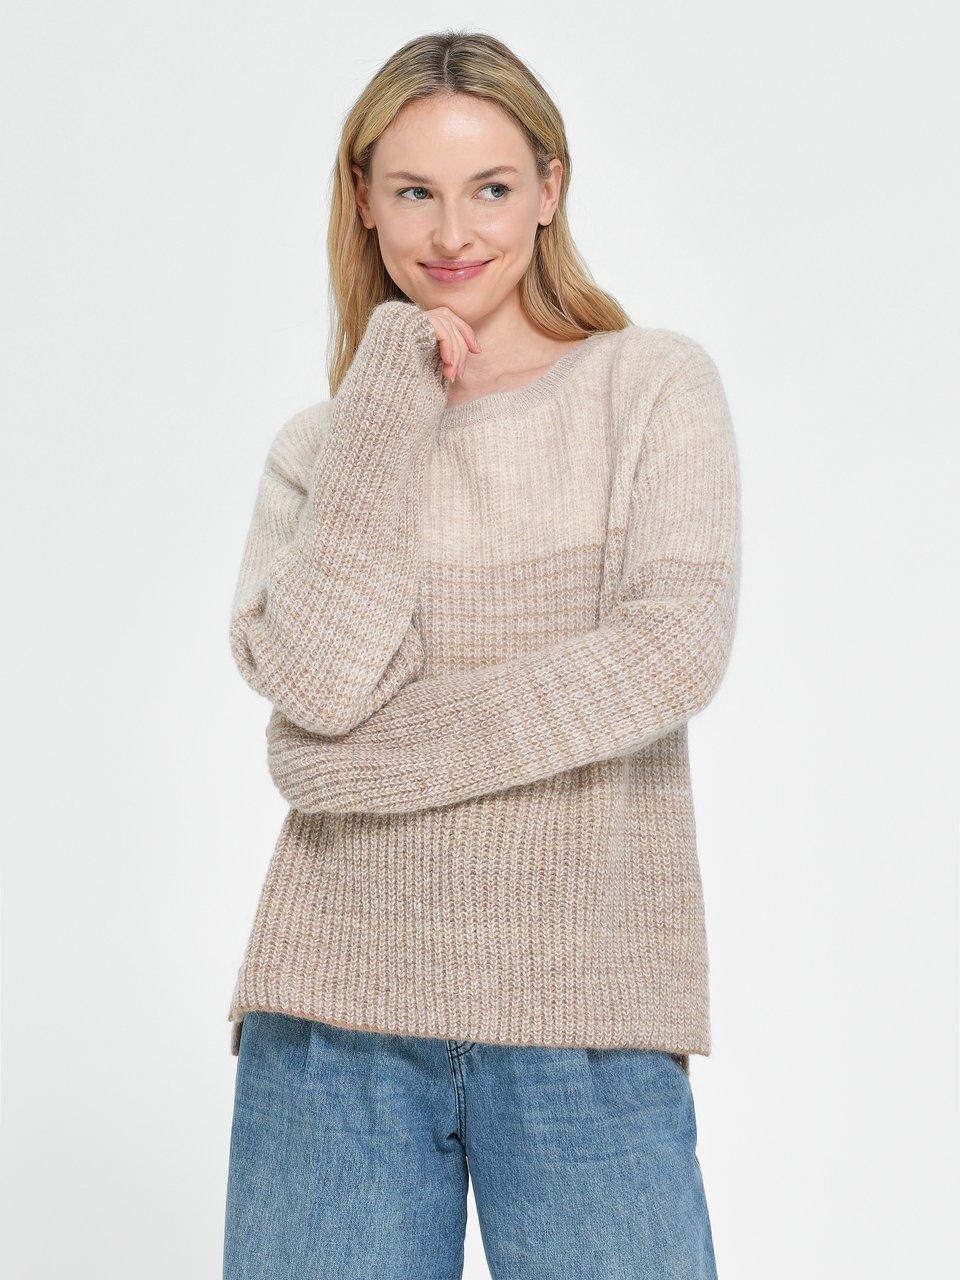 Riani - Le pull manches longues